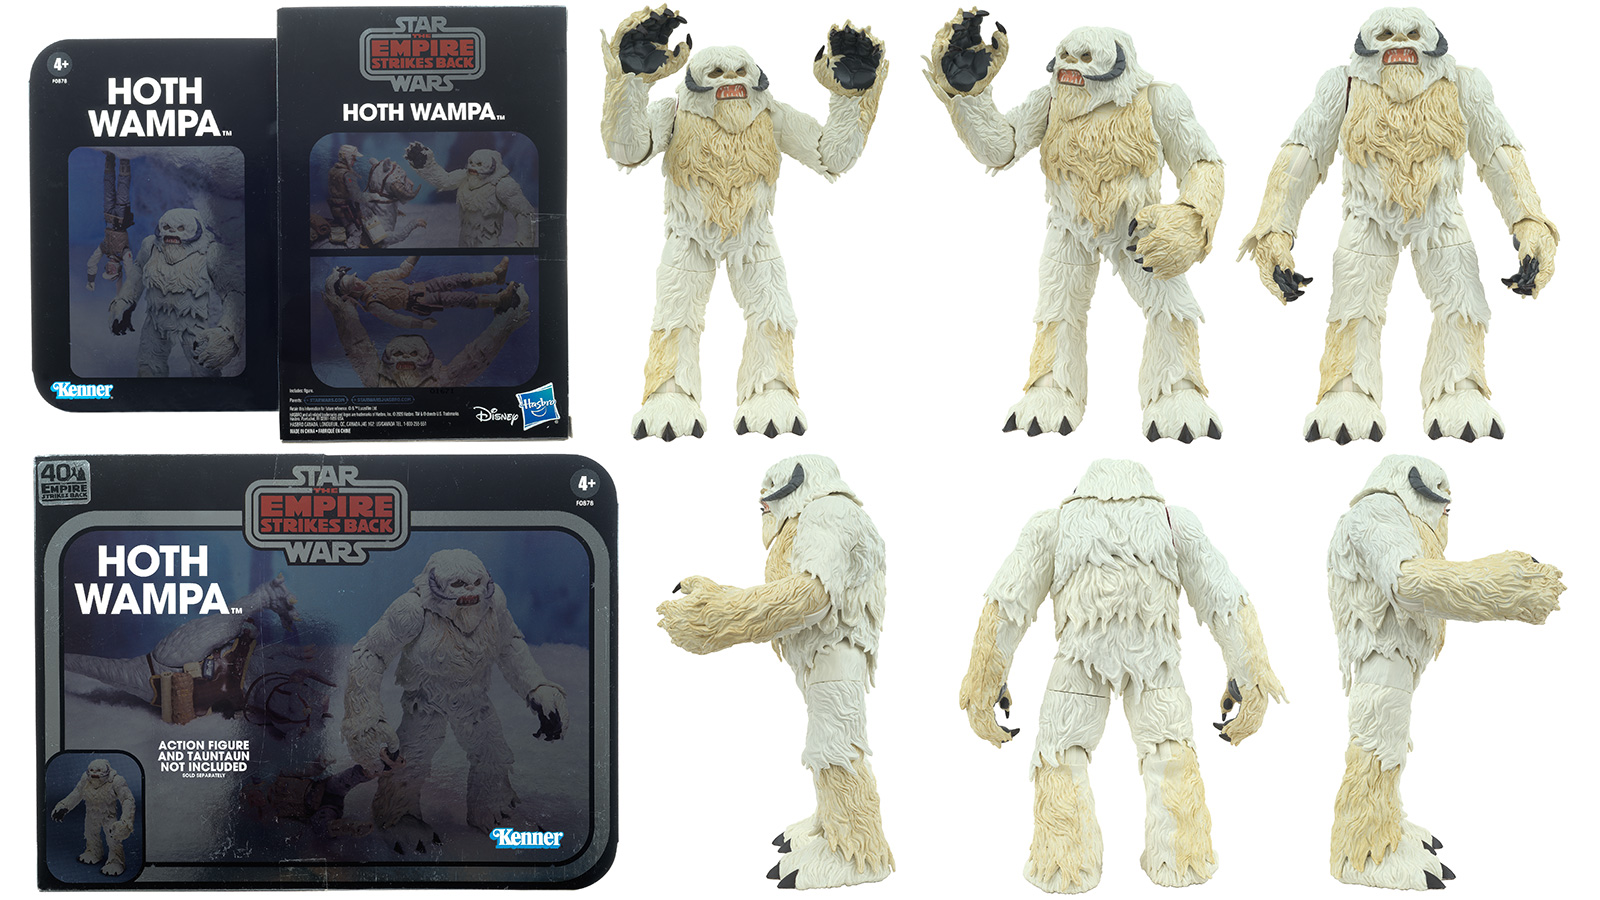 New Photos - TBS 40th Anniversary 6-Inch Exclusive Deluxe Hoth Wampa